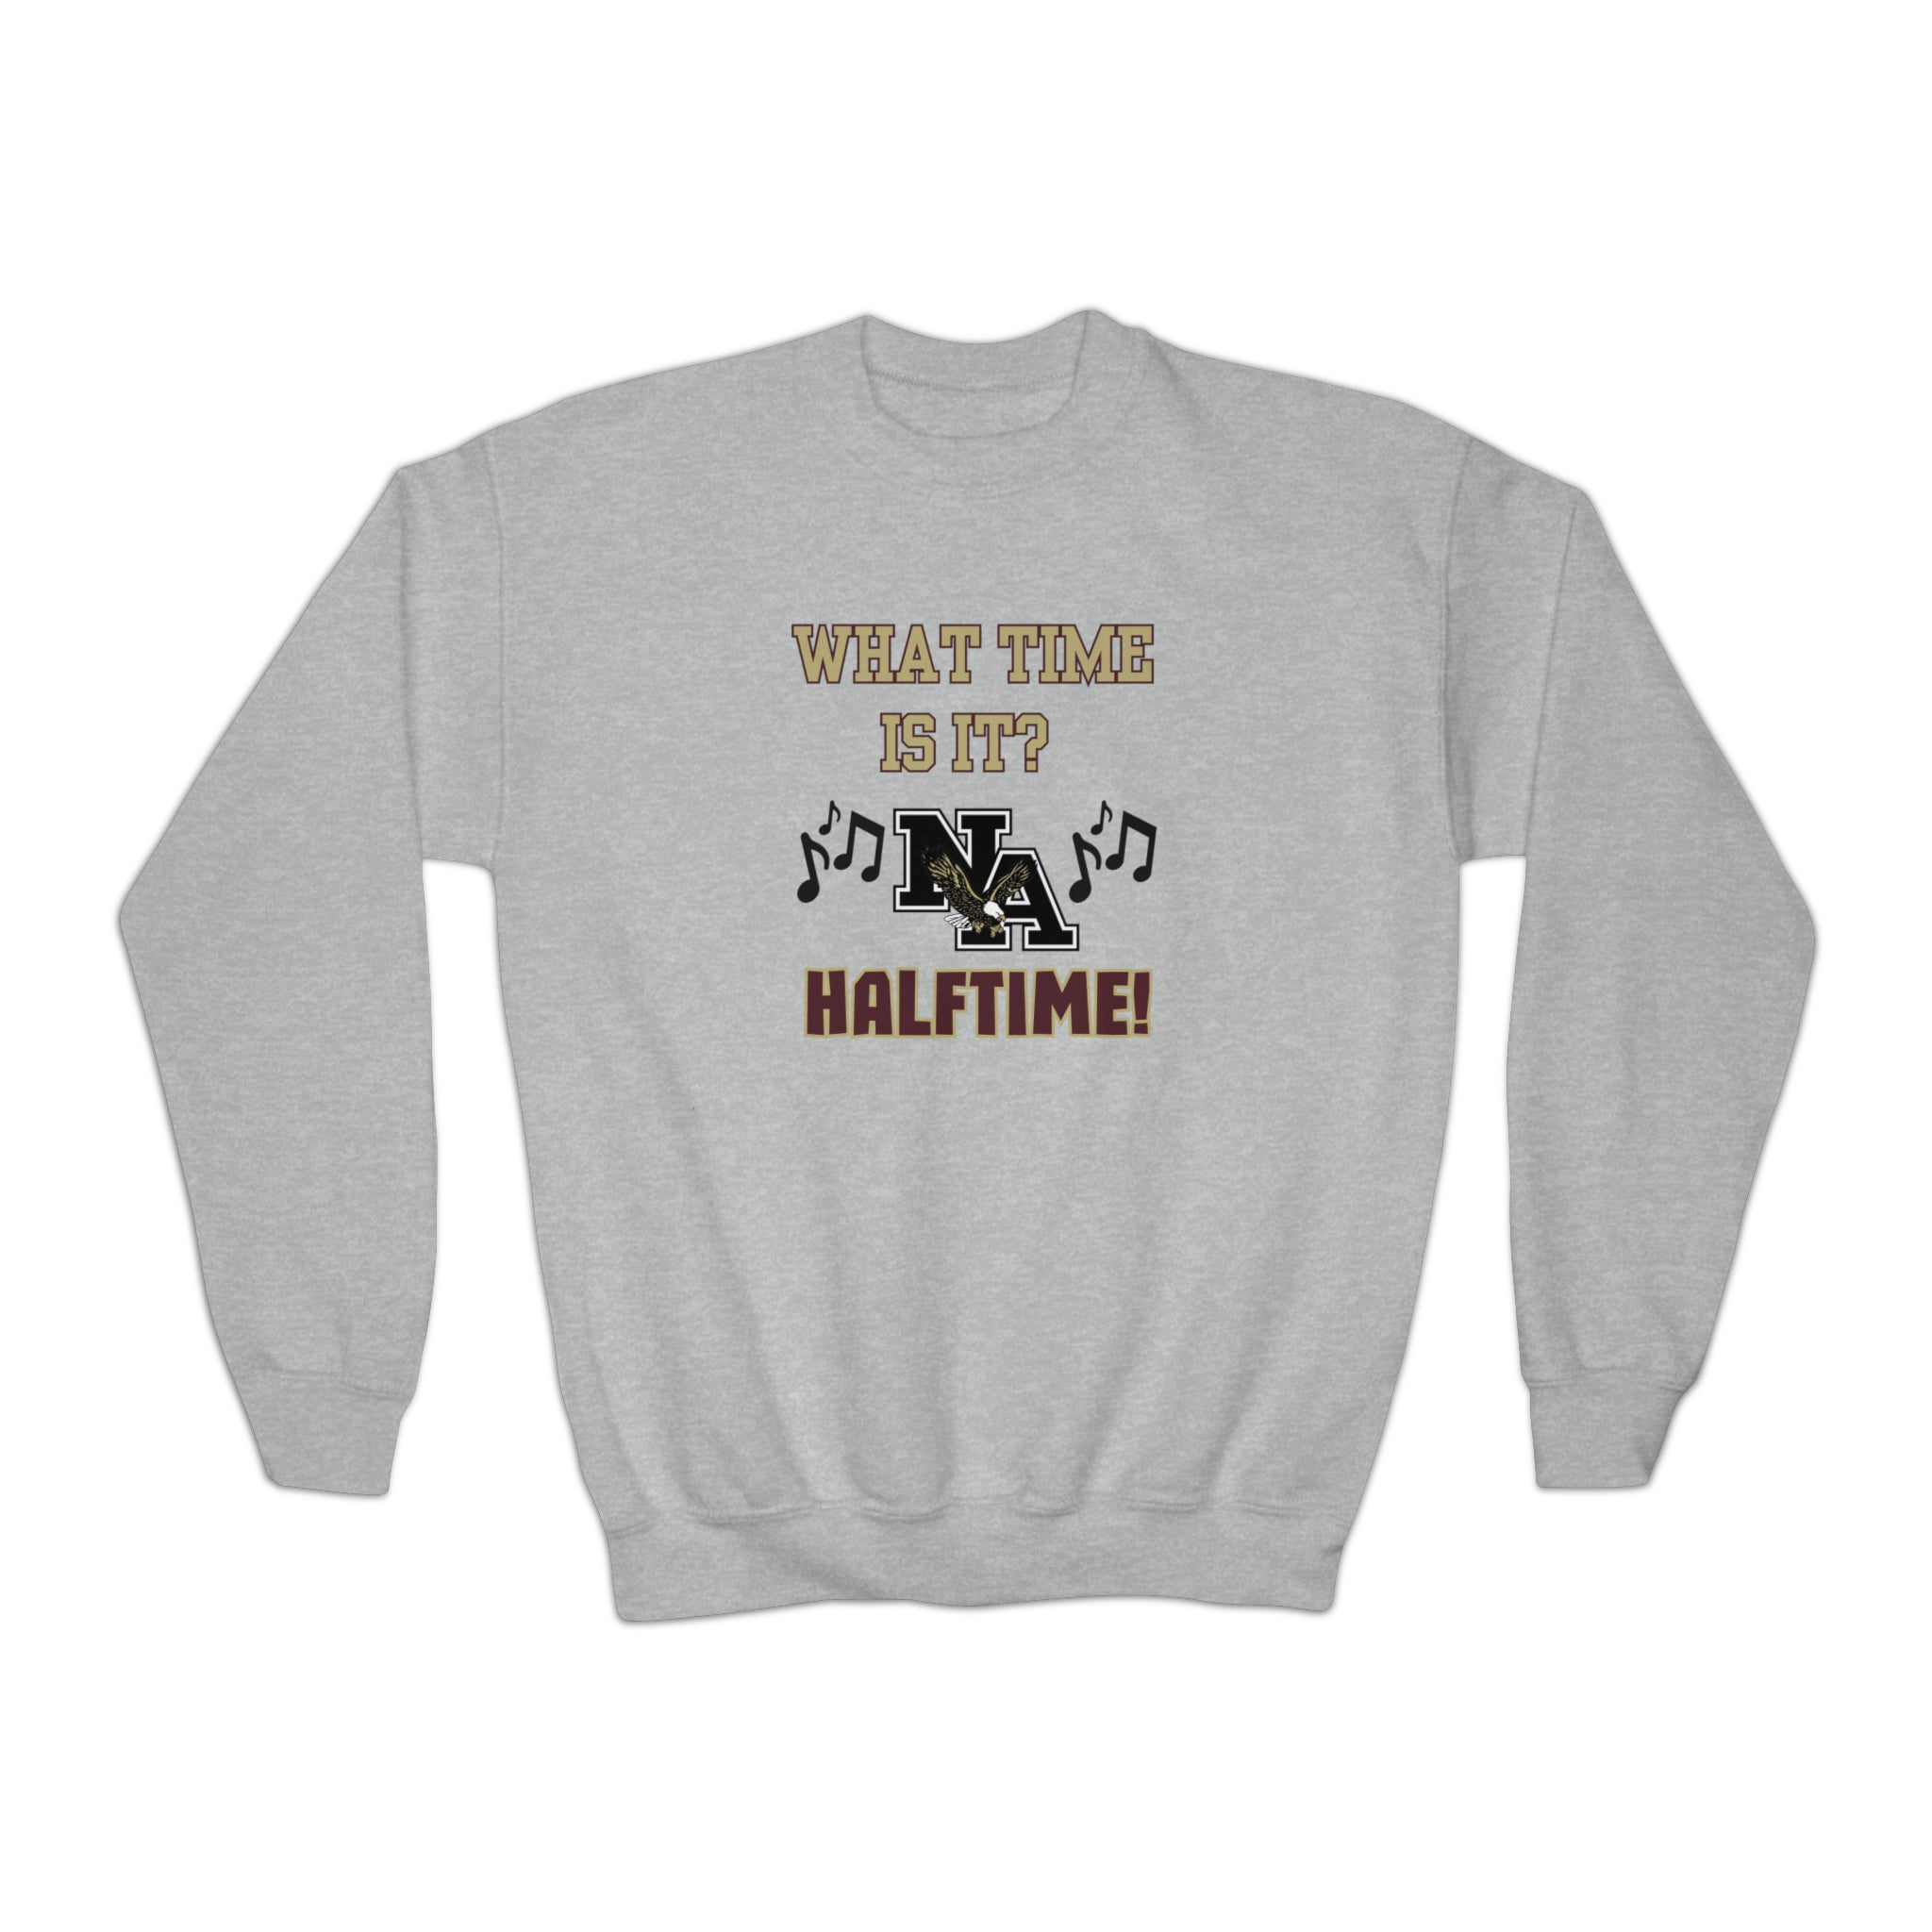 Youth Halftime Band Graphic Sweatshirt - New Albany Eagles